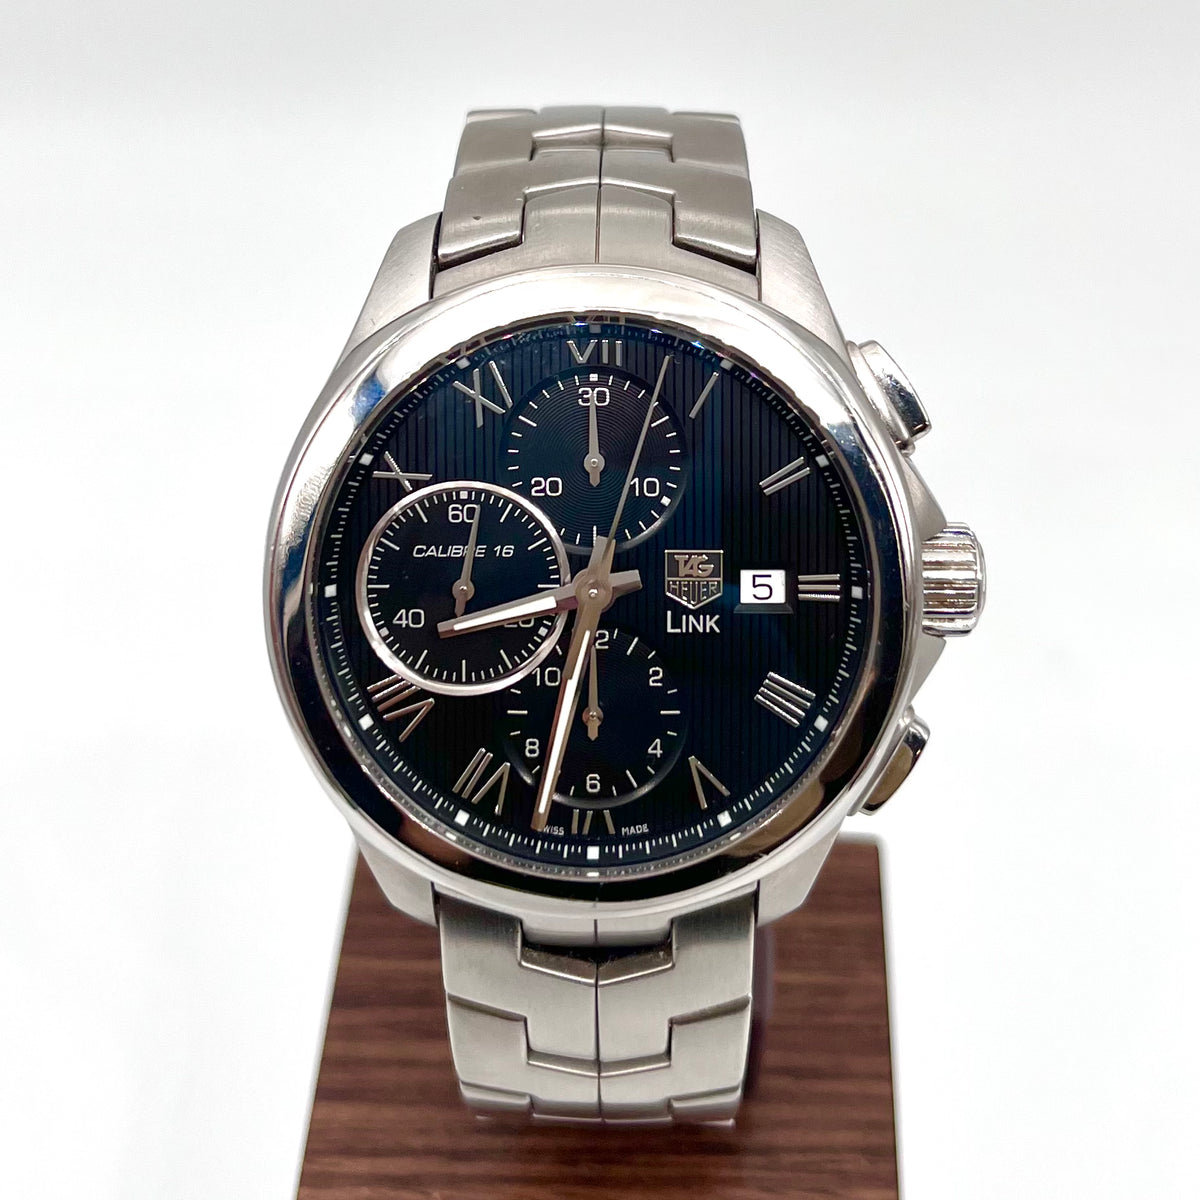 Tag Heuer Link Preowned Watches | Preowned Watches Dublin | Swiss Watch Club 